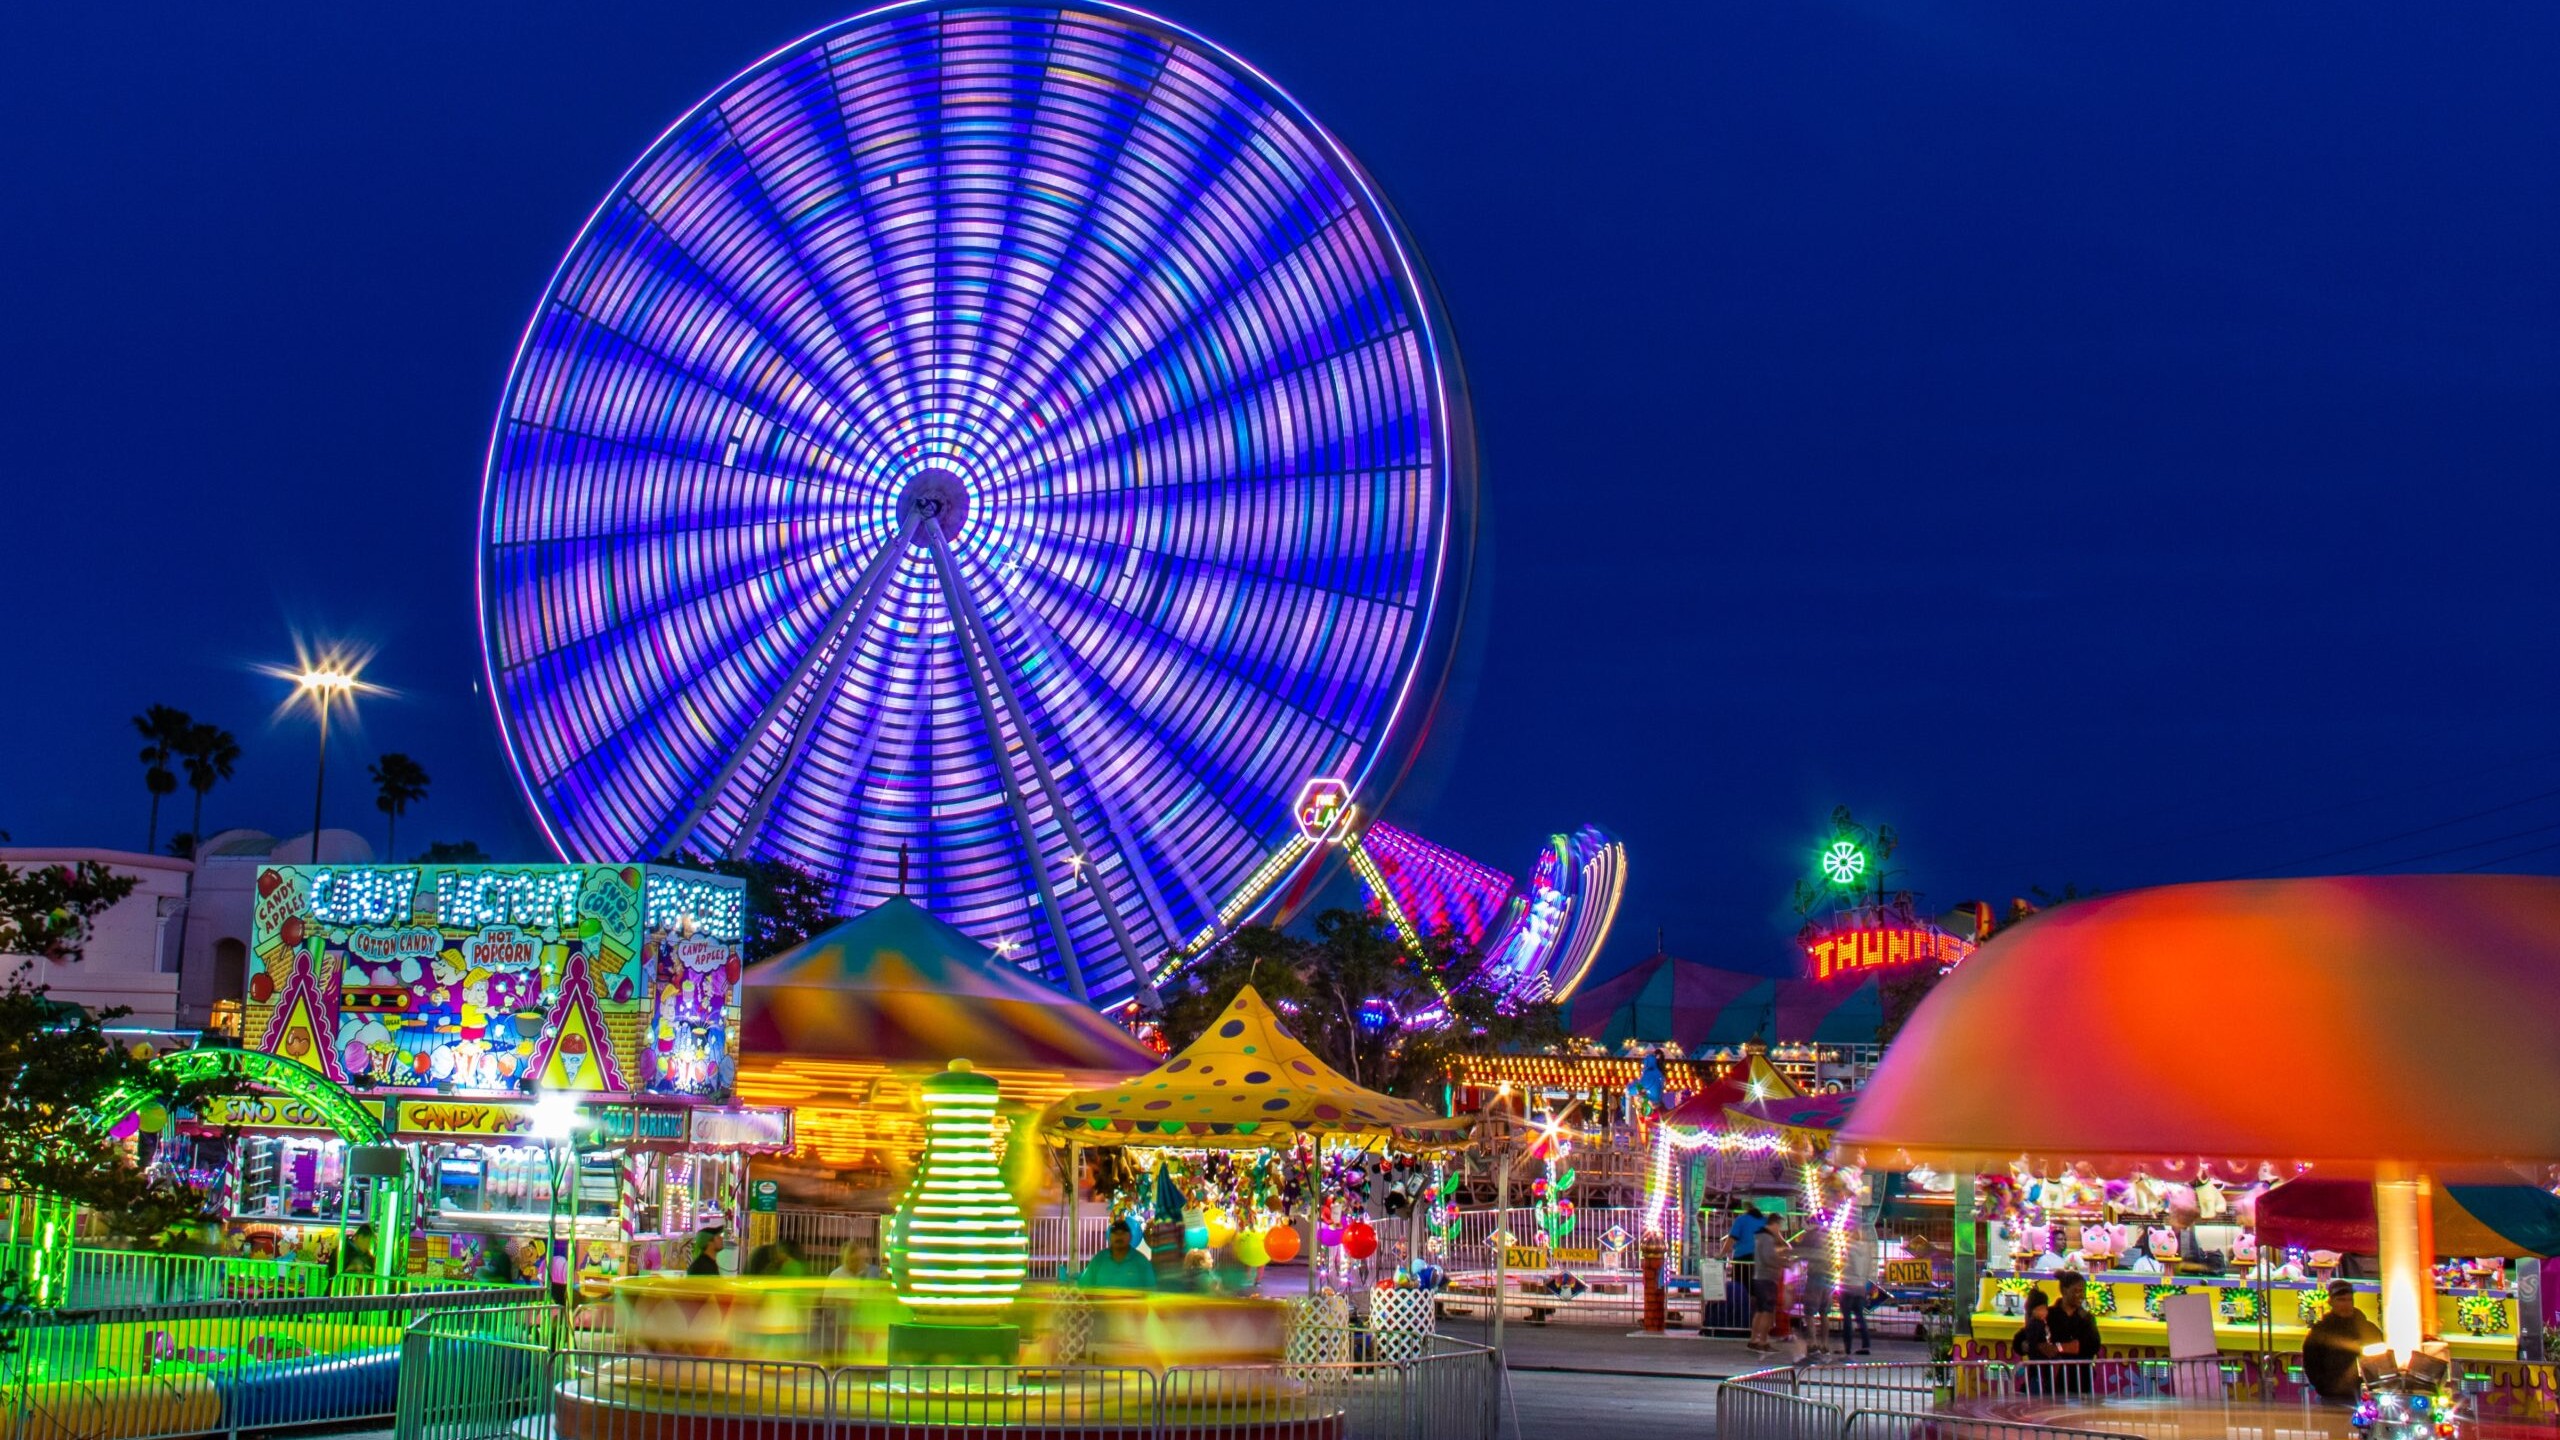 Amusement park rides and Faris wheel at night with fast moving neon lights